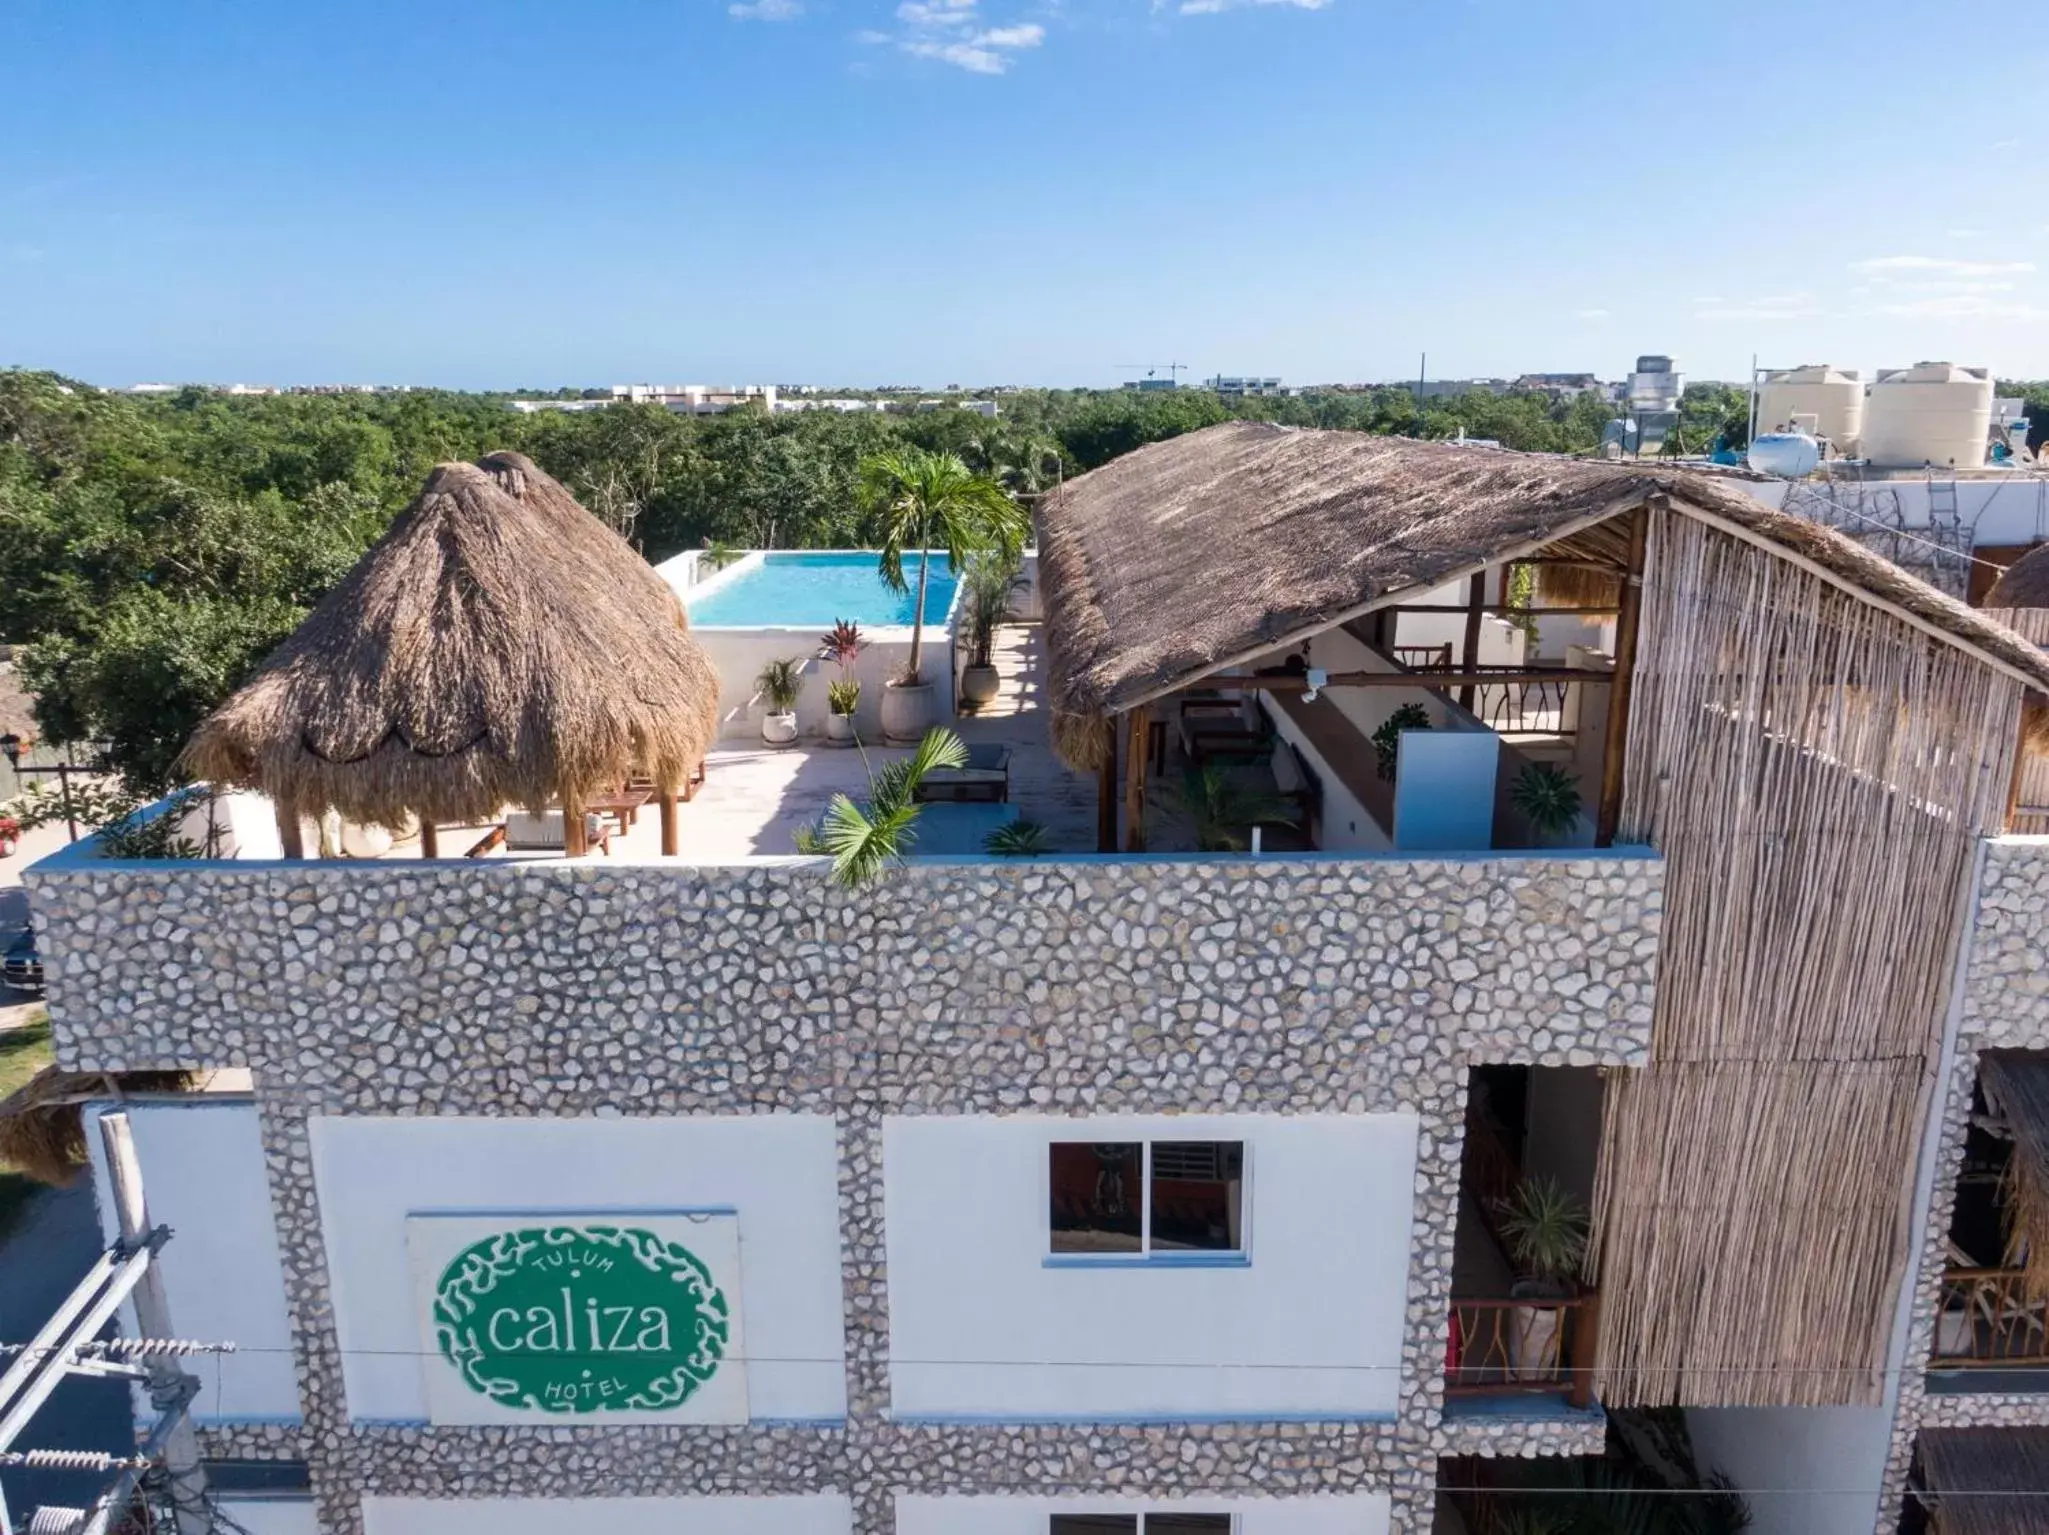 Property building, Pool View in Caliza Tulum Hotel